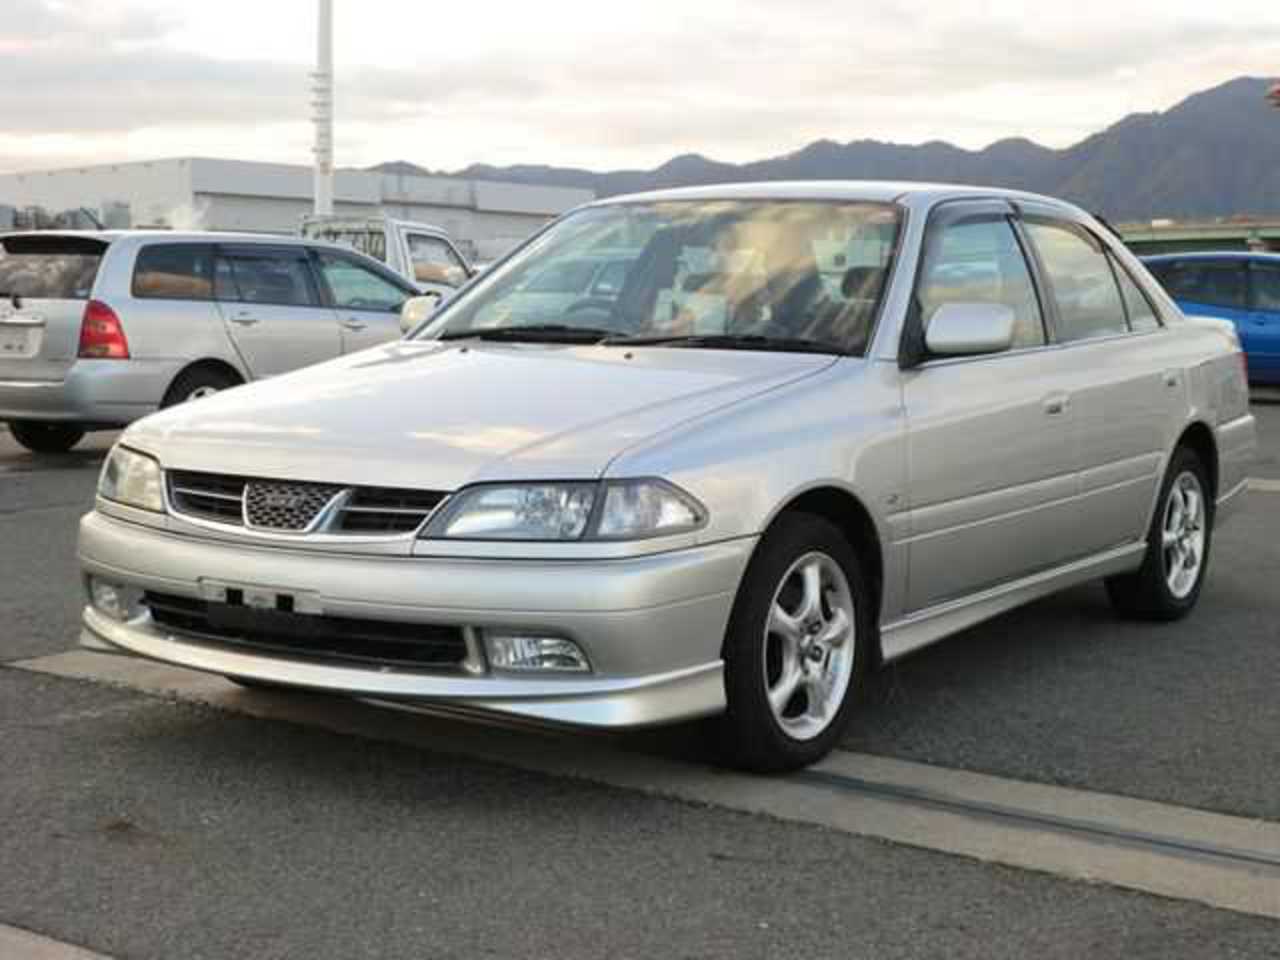 File:2001 Toyota Carina GT AT212.jpg. No higher resolution available.